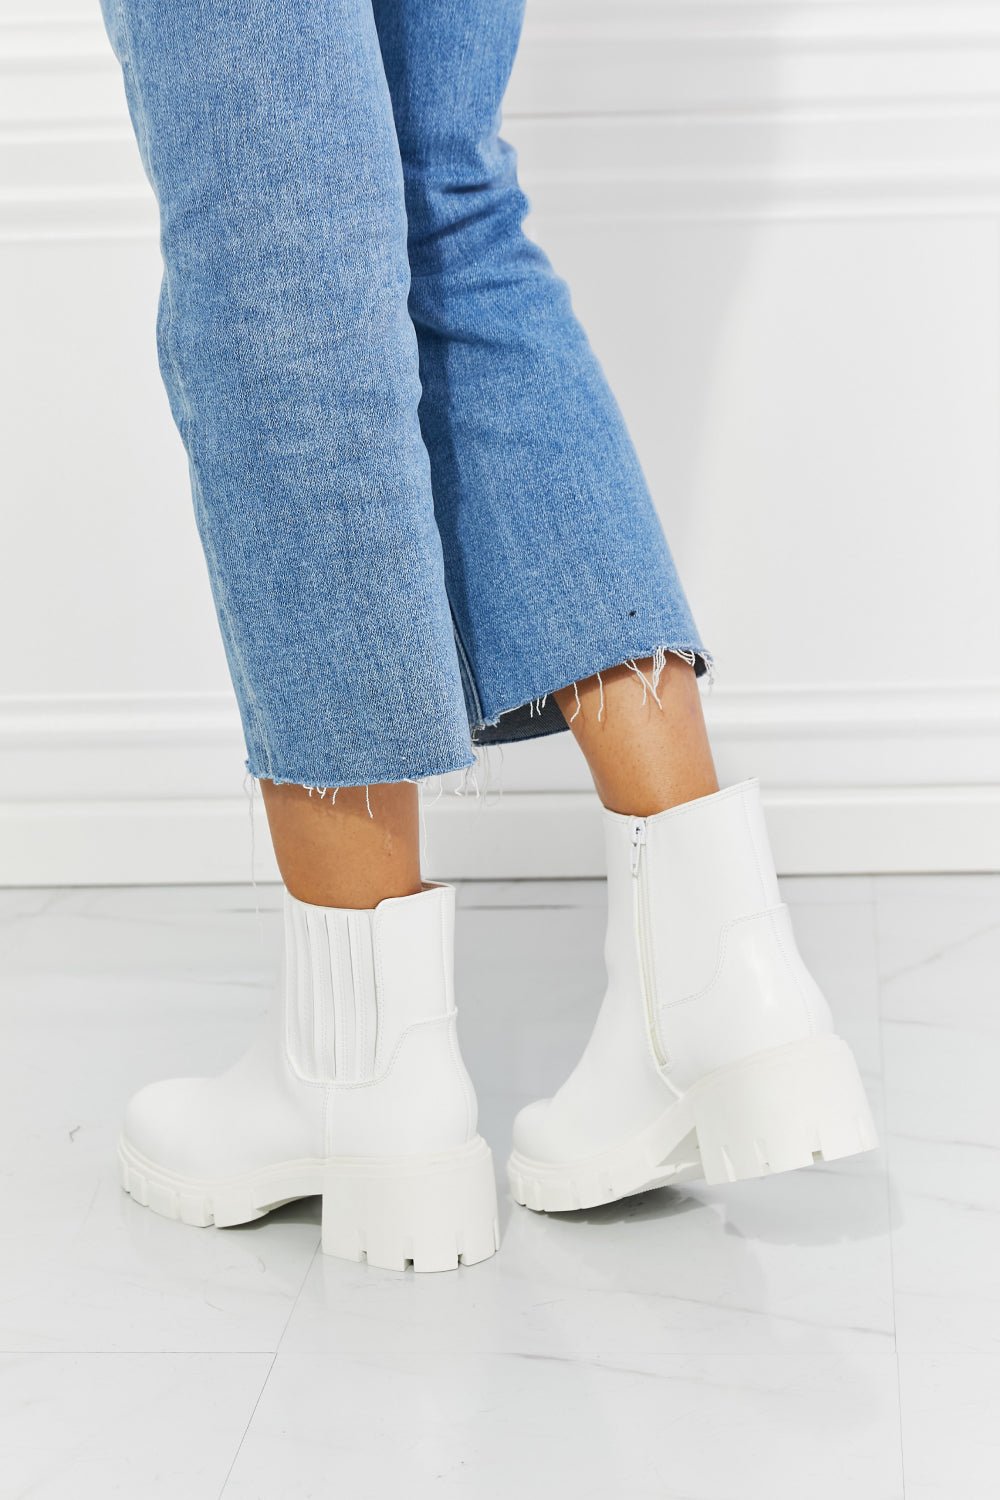 Vegan Leather Lug Sole Chelsea Boots in WhiteBootsMelody